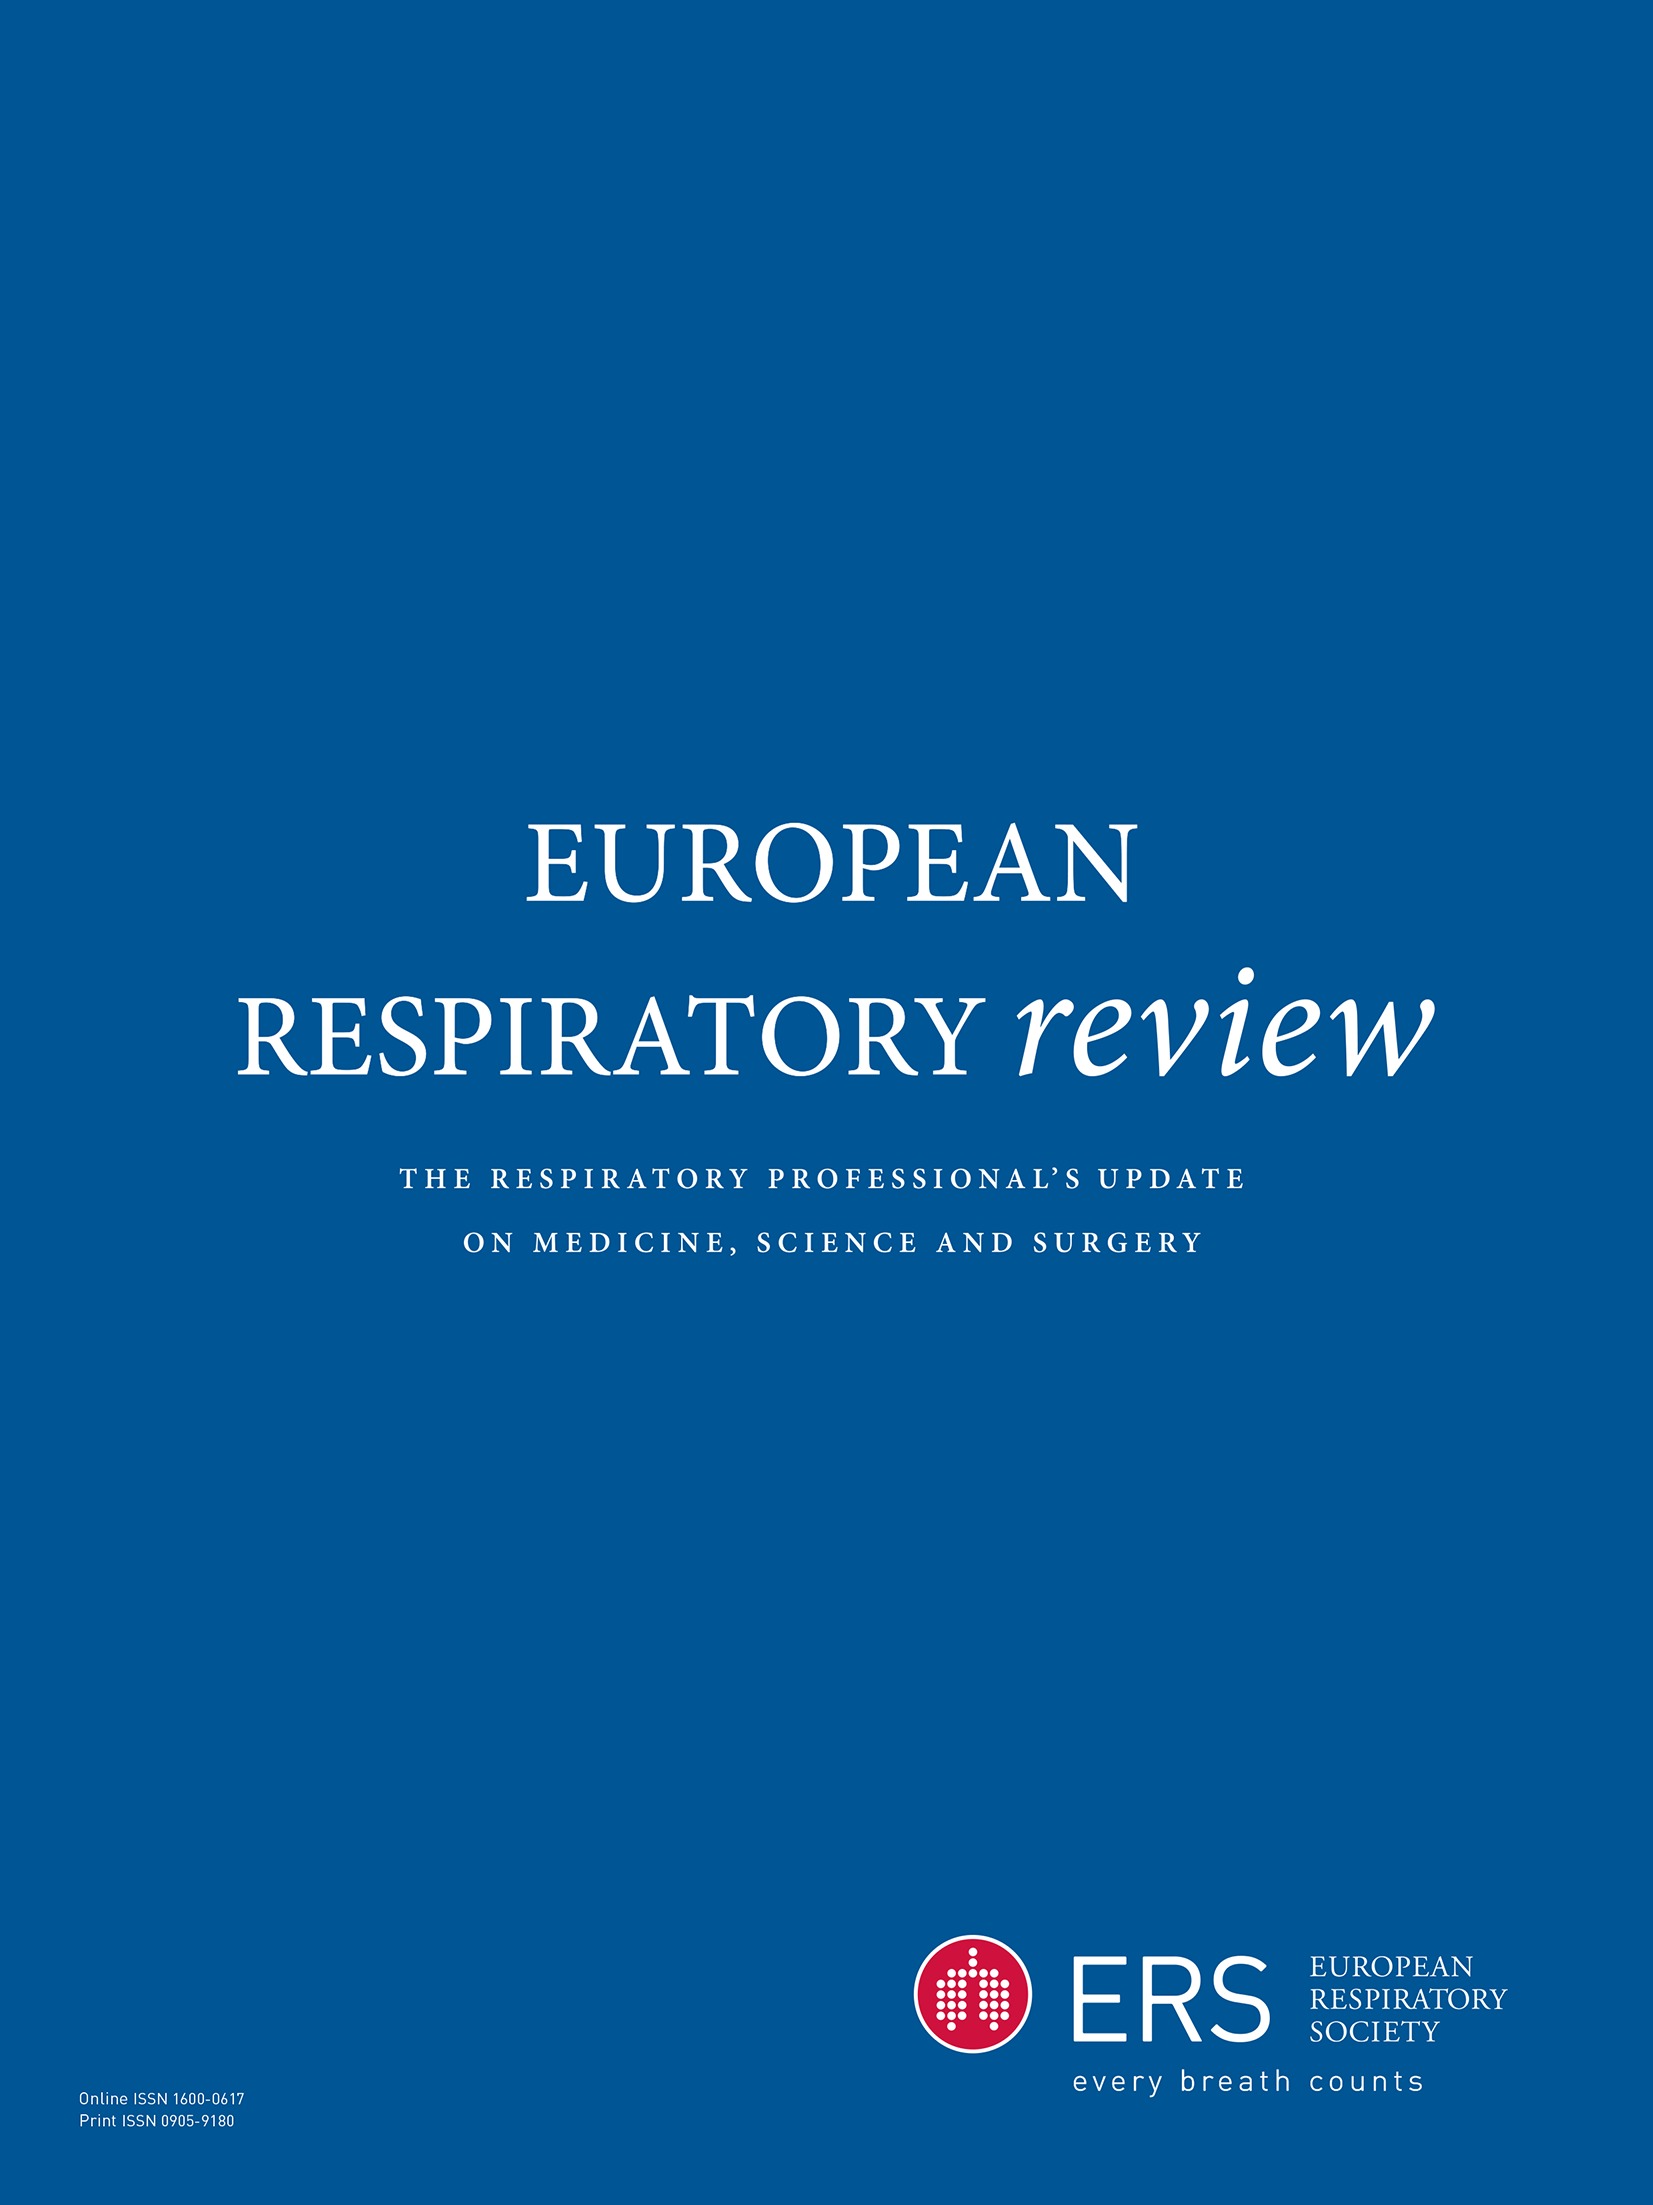 Inhaled versus systemic corticosteroids for acute exacerbations of COPD: a systematic review and meta-analysis